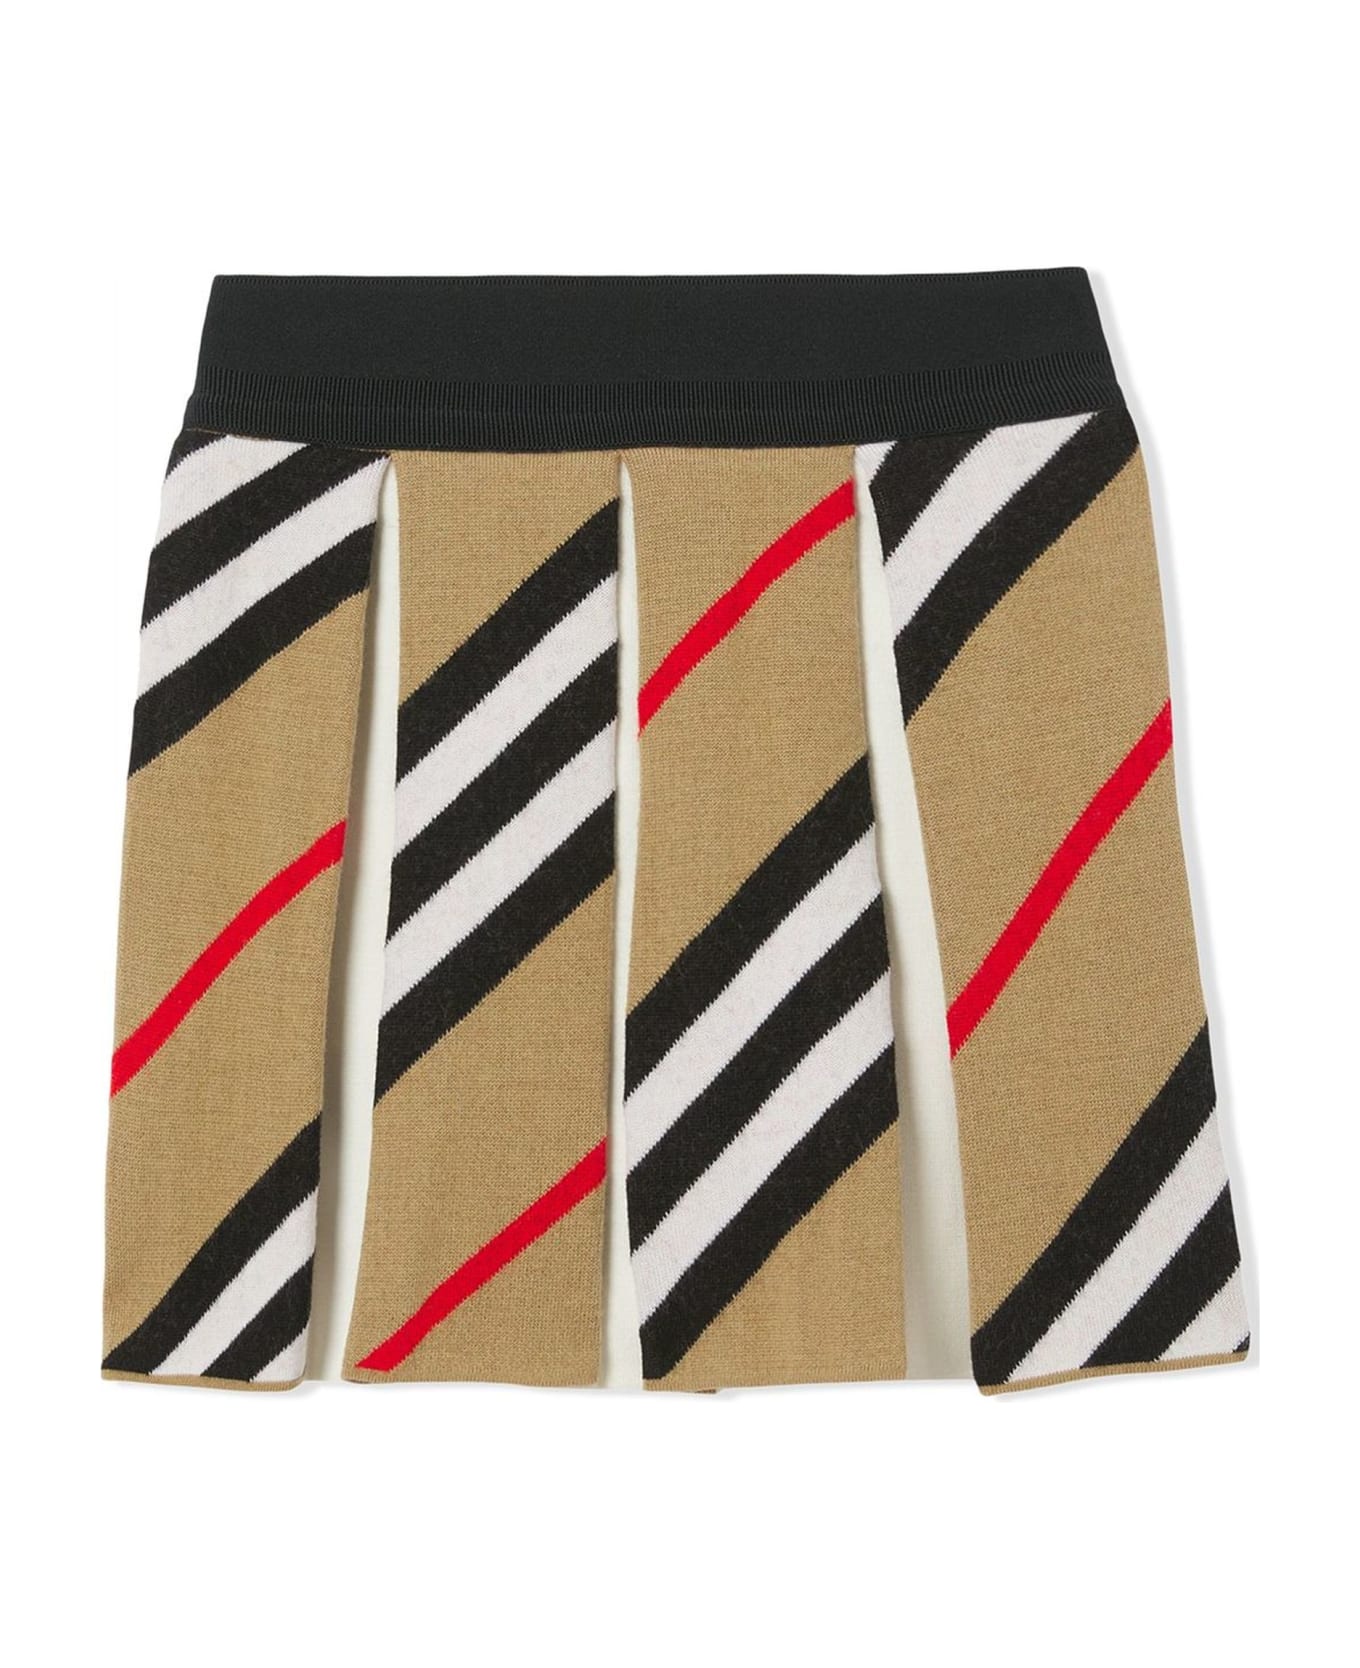 Burberry Archive Beige Wool-cotton Blend Skirt - Check